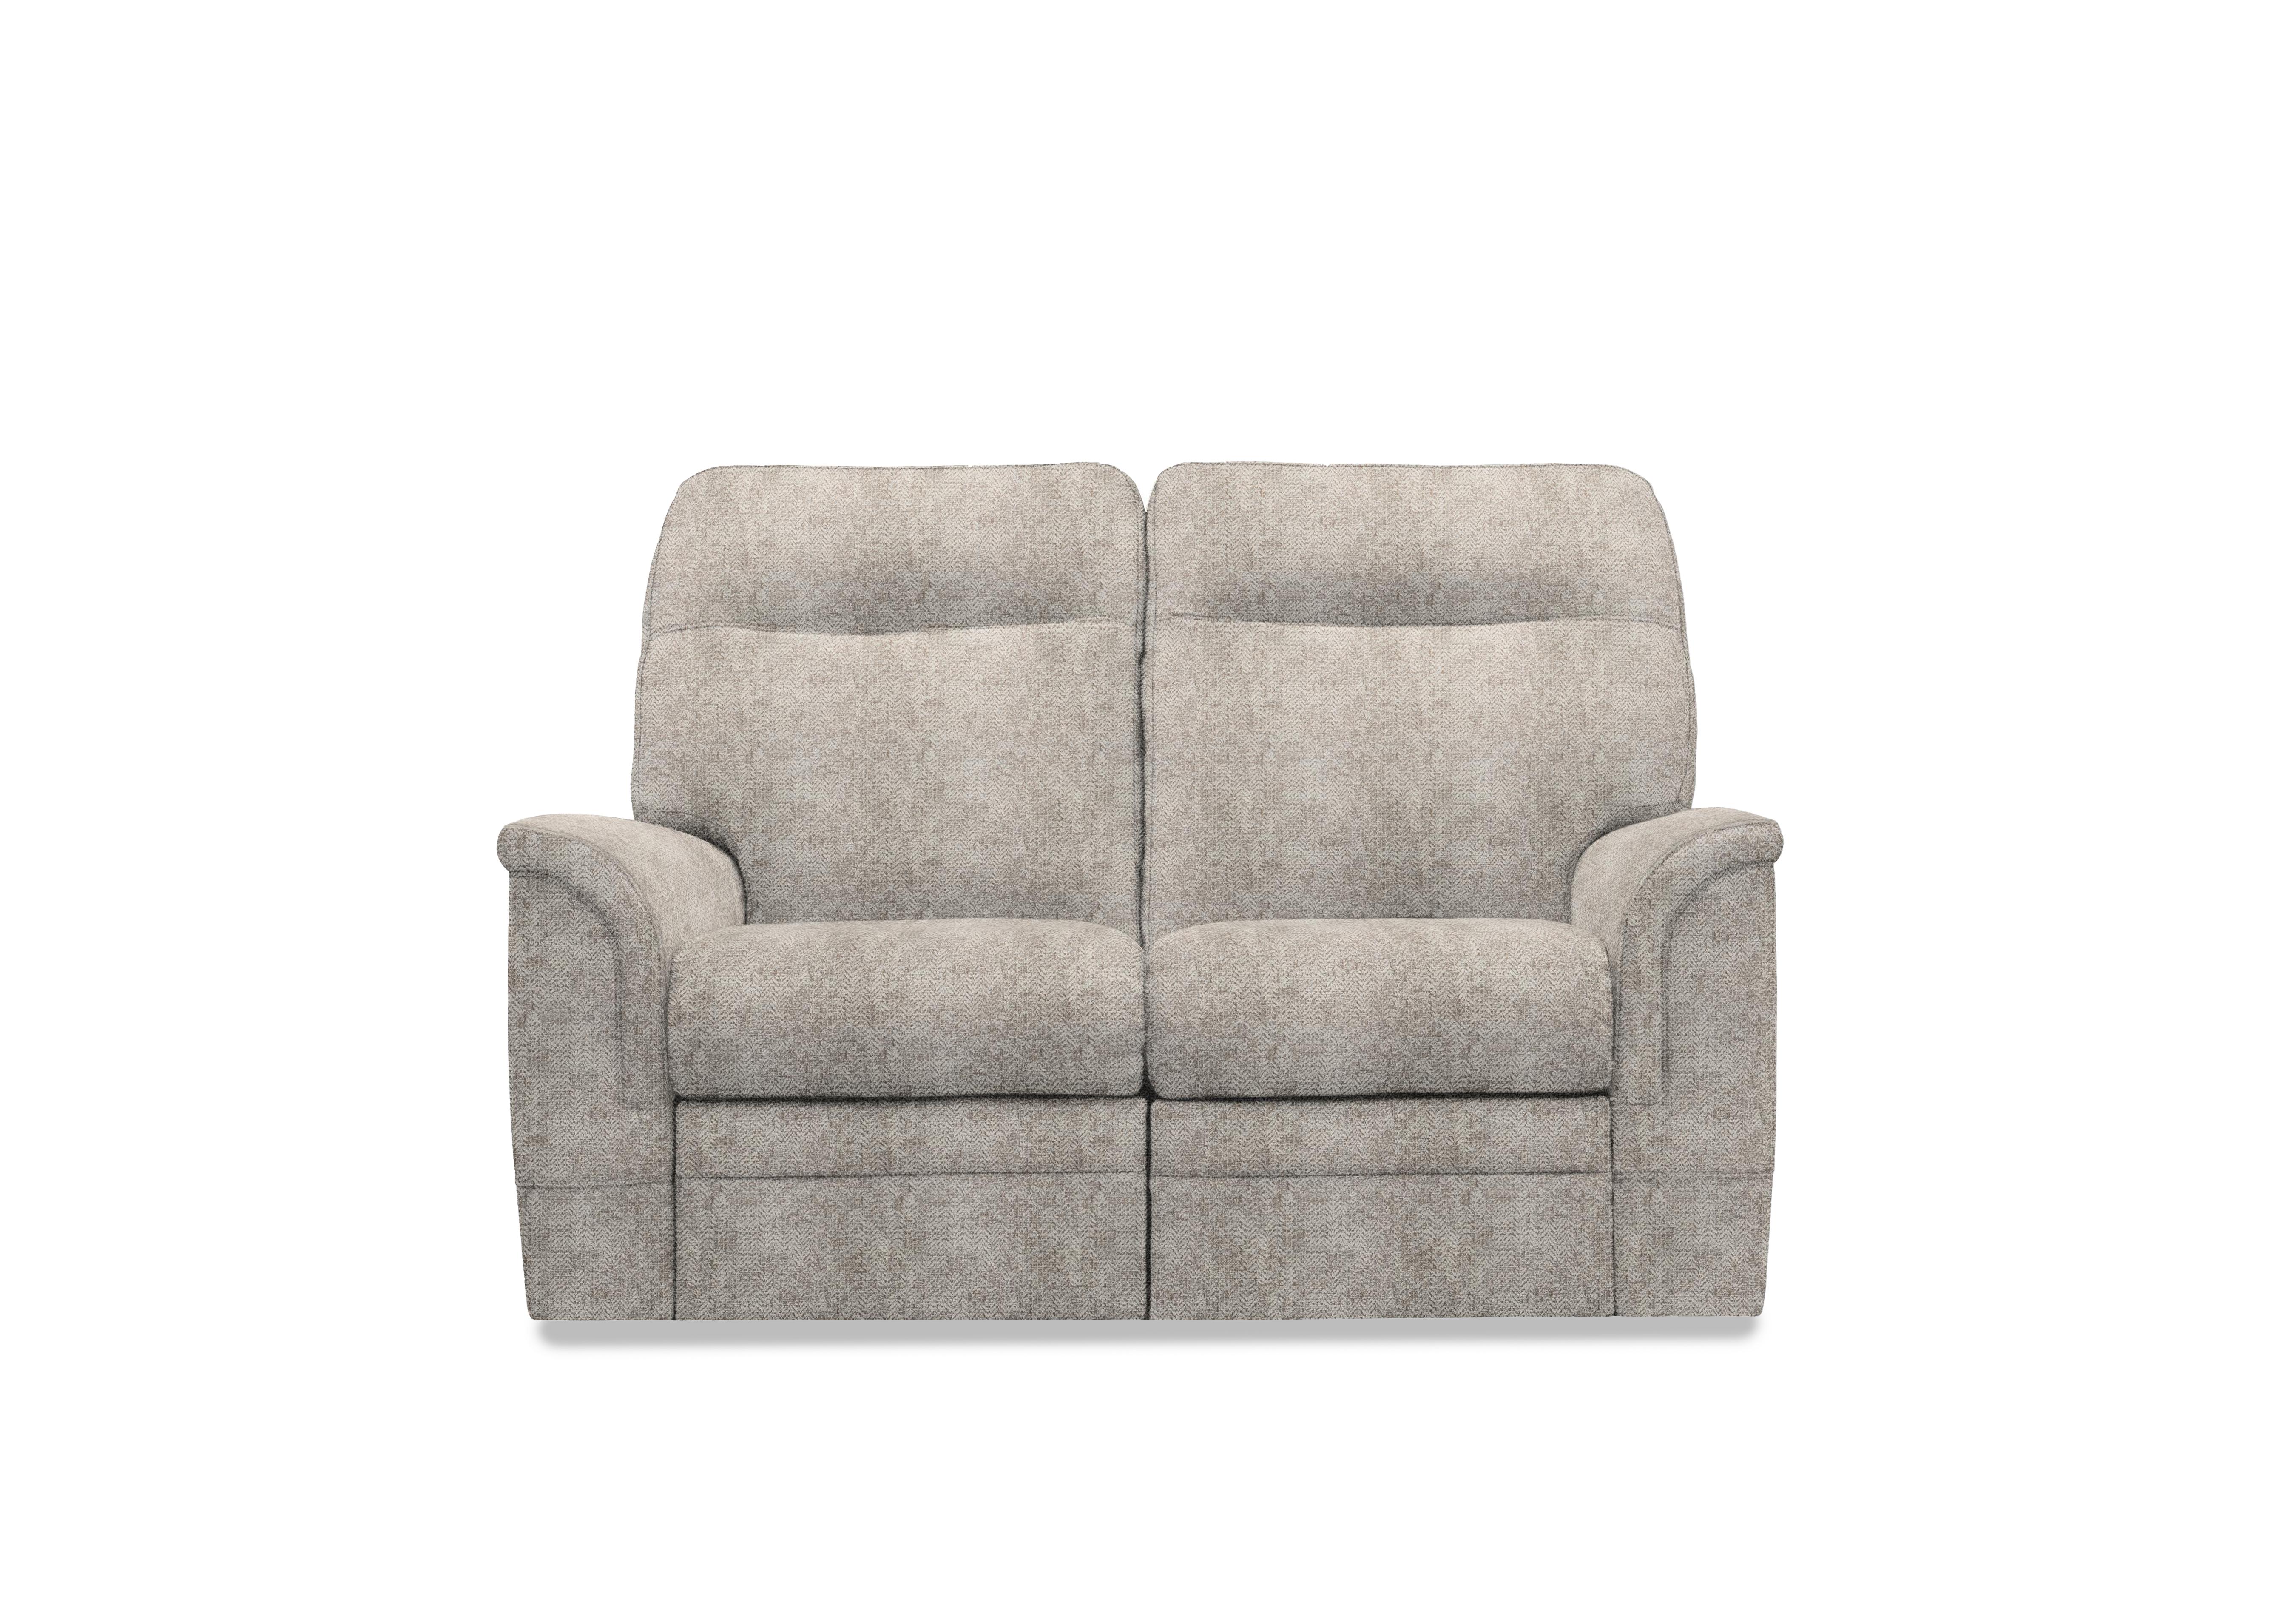 Hudson 23 Fabric 2 Seater Power Recliner Sofa with Power Headrests and Power Lumbar in Ida Stone 006035-0055 on Furniture Village